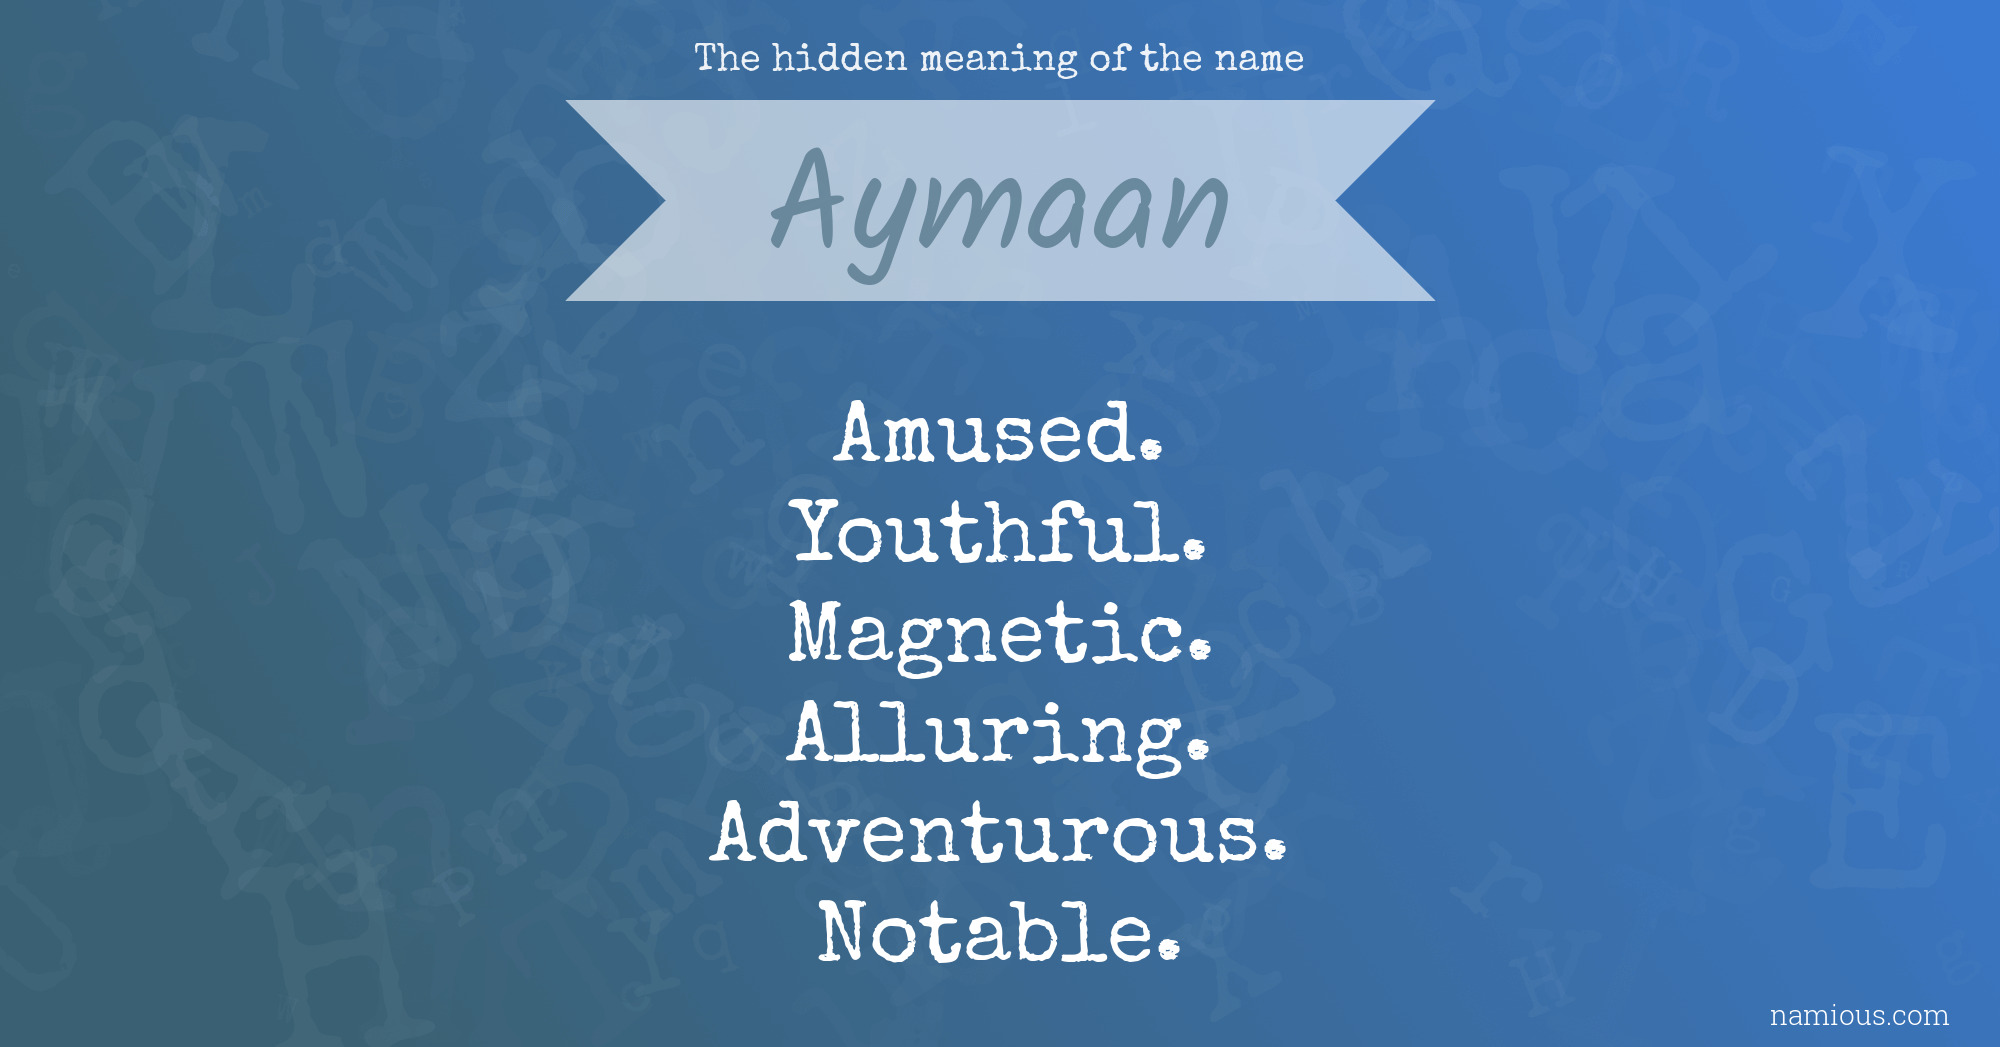 The hidden meaning of the name Aymaan